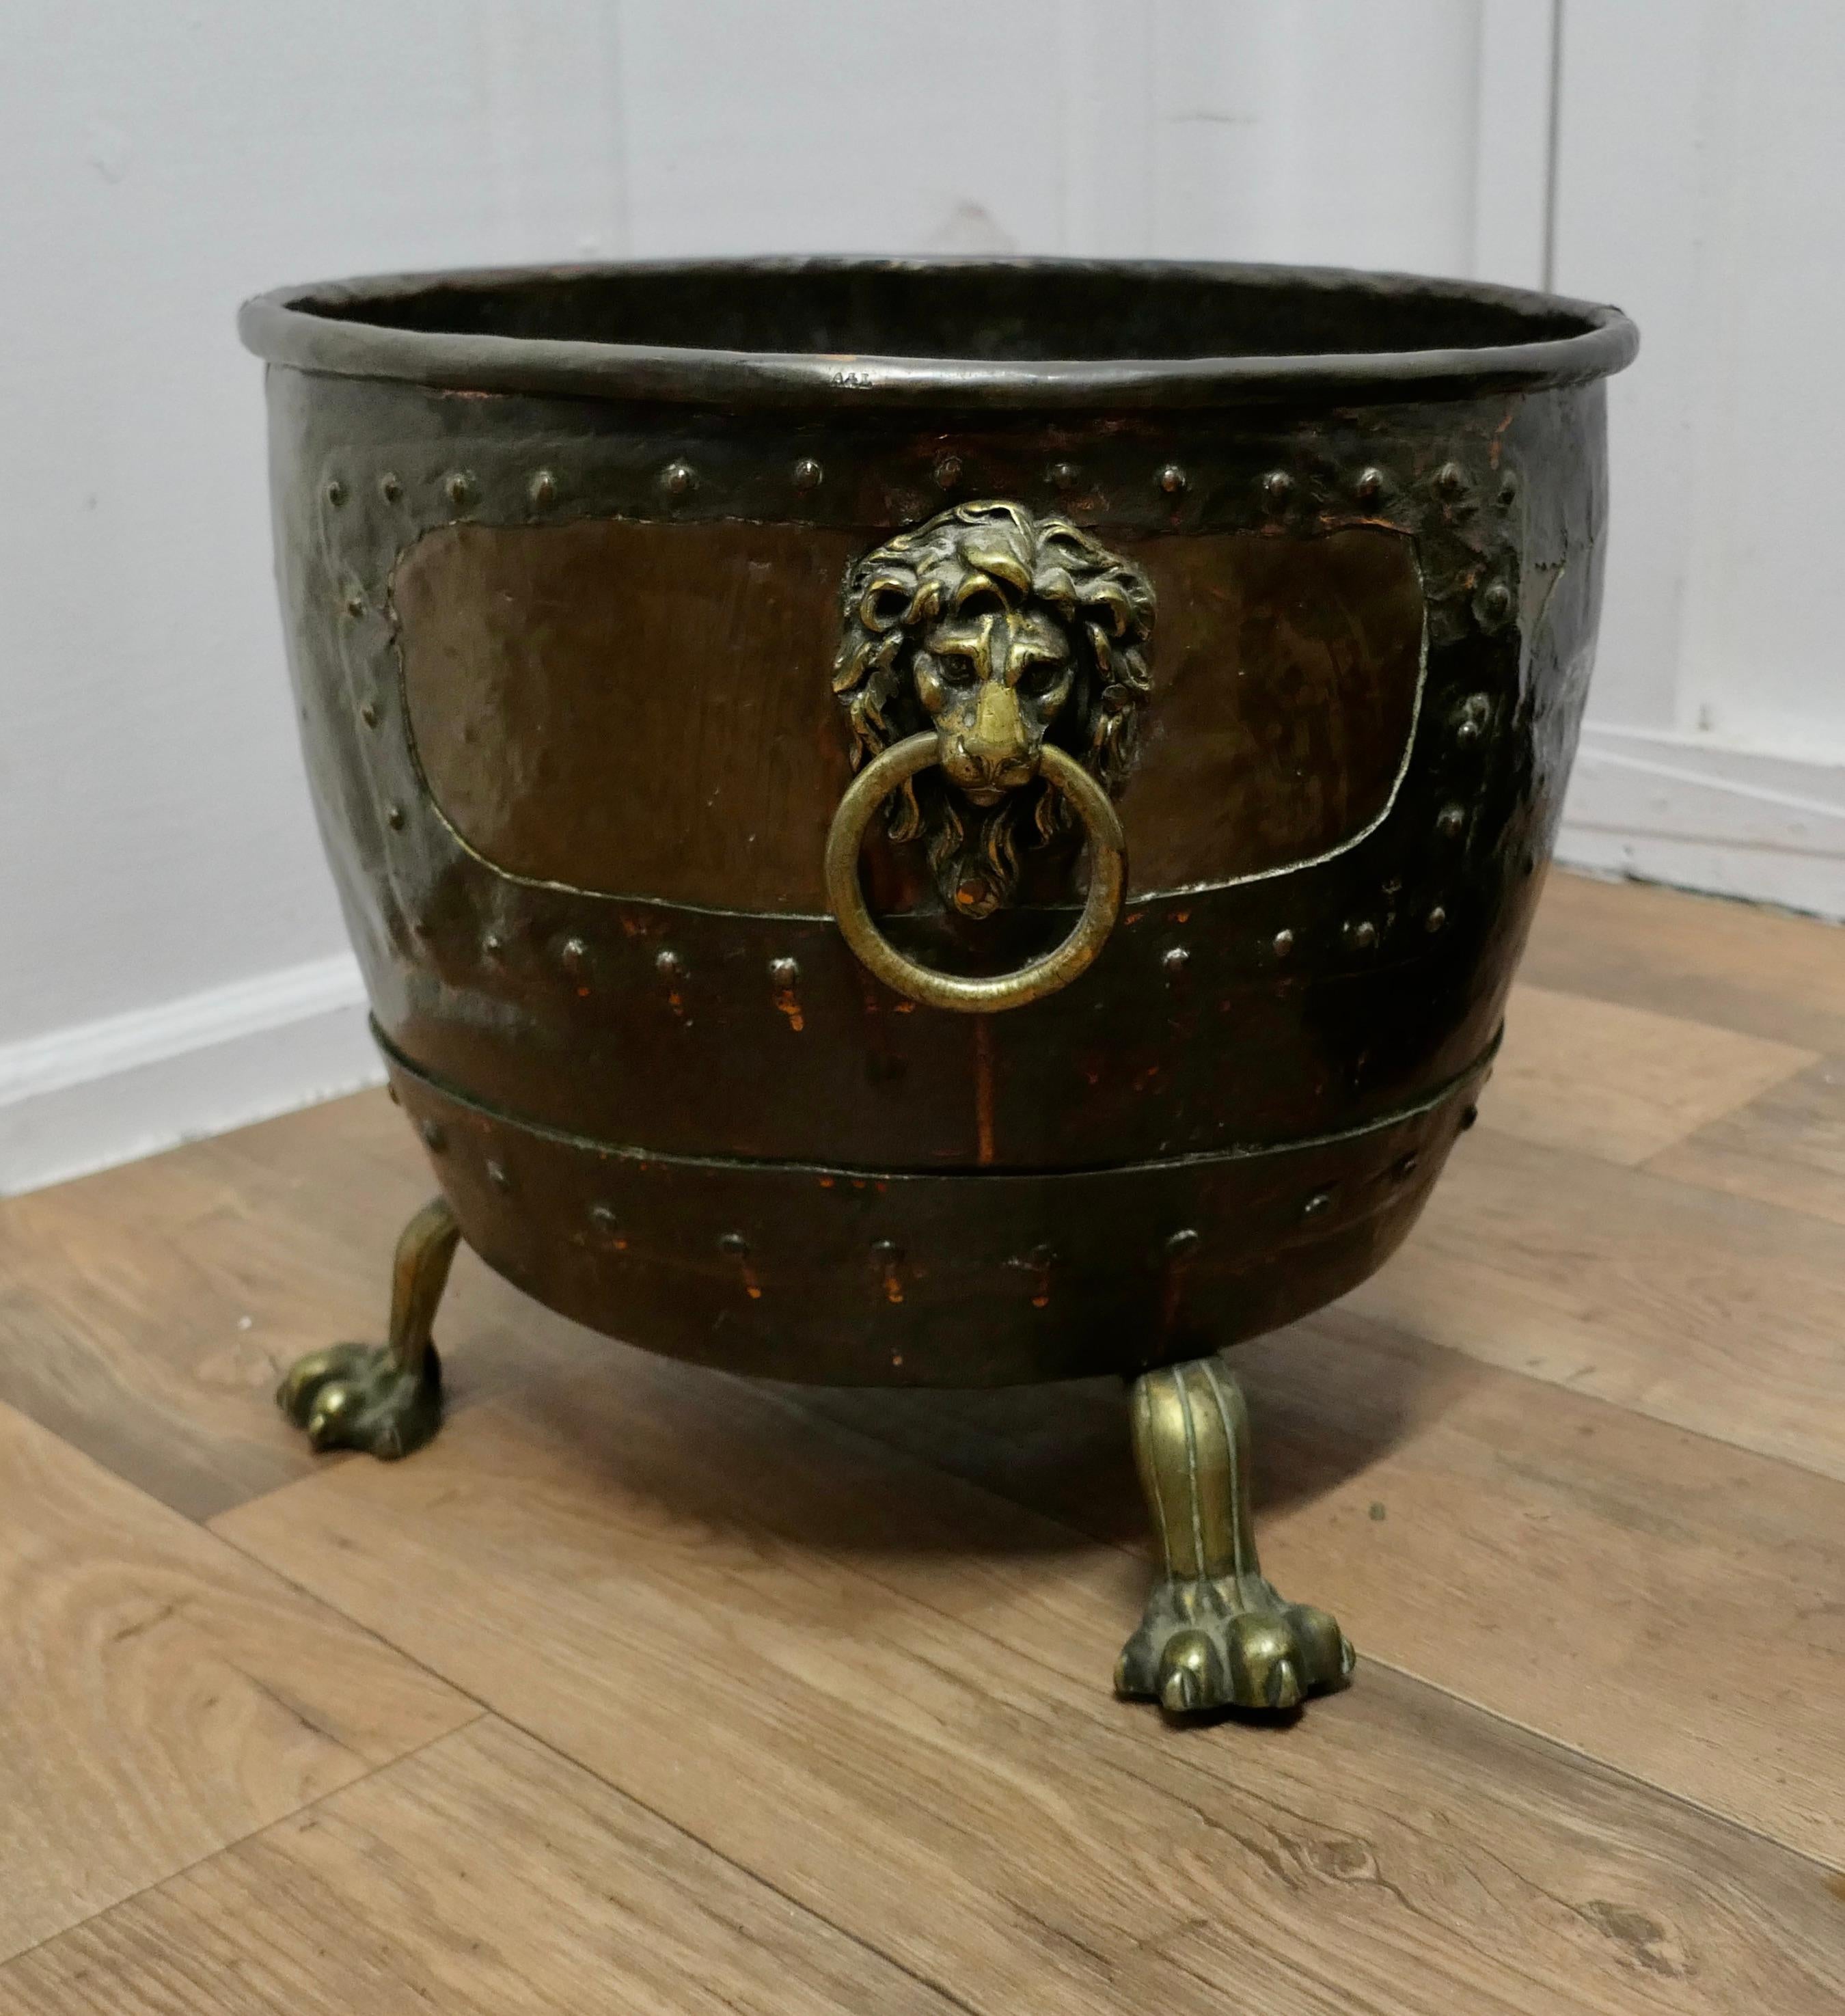 Large Early 19th Century Copper Log Cauldron

This is a lovely looking Cauldron, it has obviously been a much treasured piece, it has tinkered patches and riveted repairs
The bottom of the cauldron has been reinforced with a Terracotta lining making